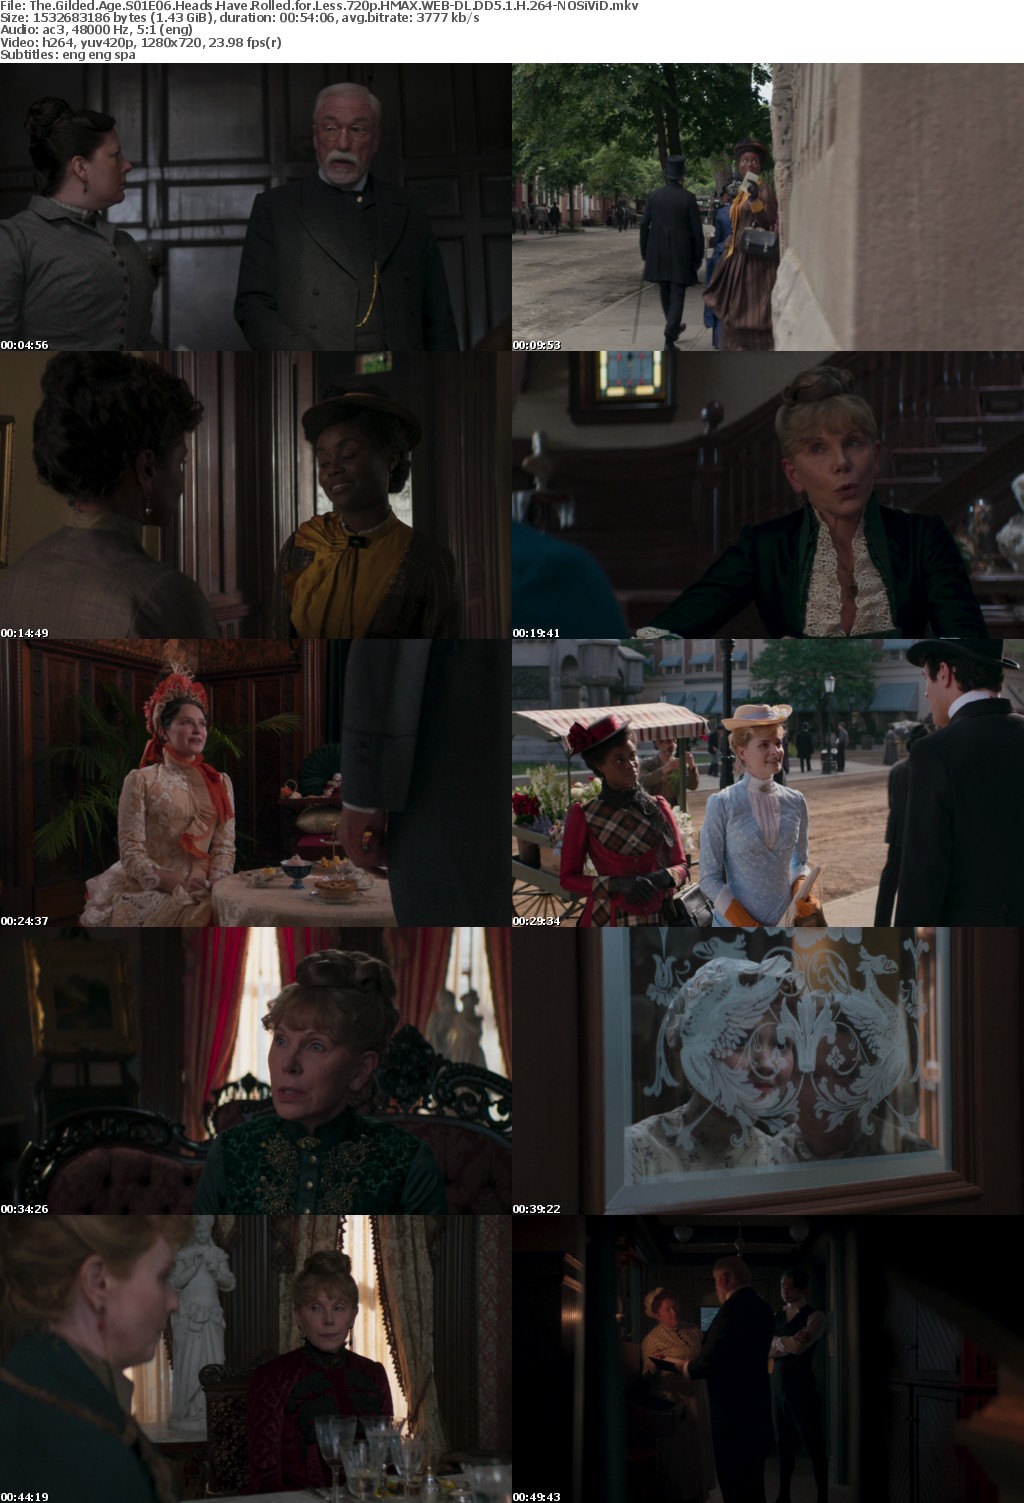 The Gilded Age S01E06 Heads Have Rolled for Less 720p HMAX WEBRip DD5 1 x264-NOSiViD